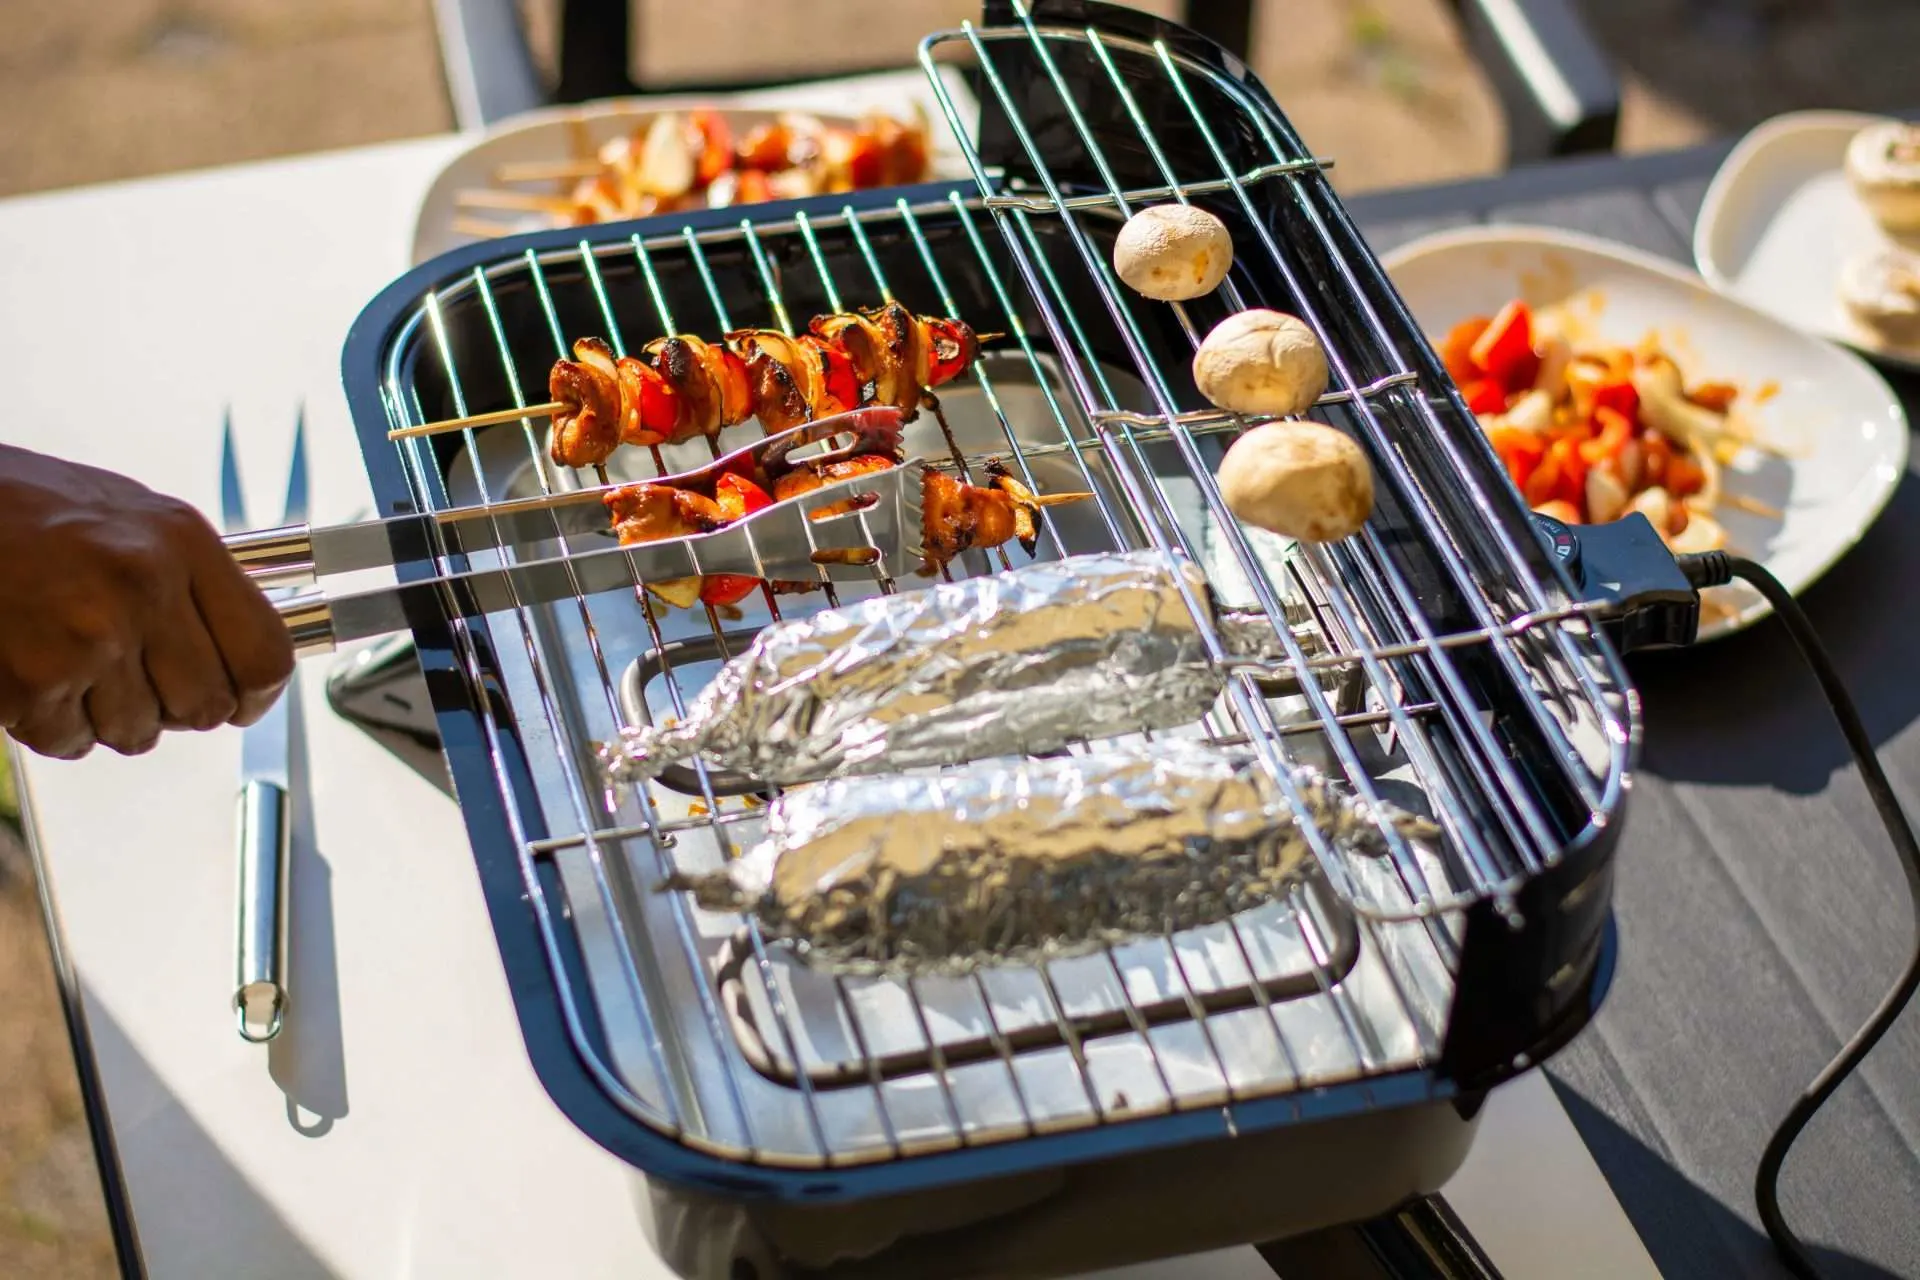 Portable electric grill making vegetables while camping